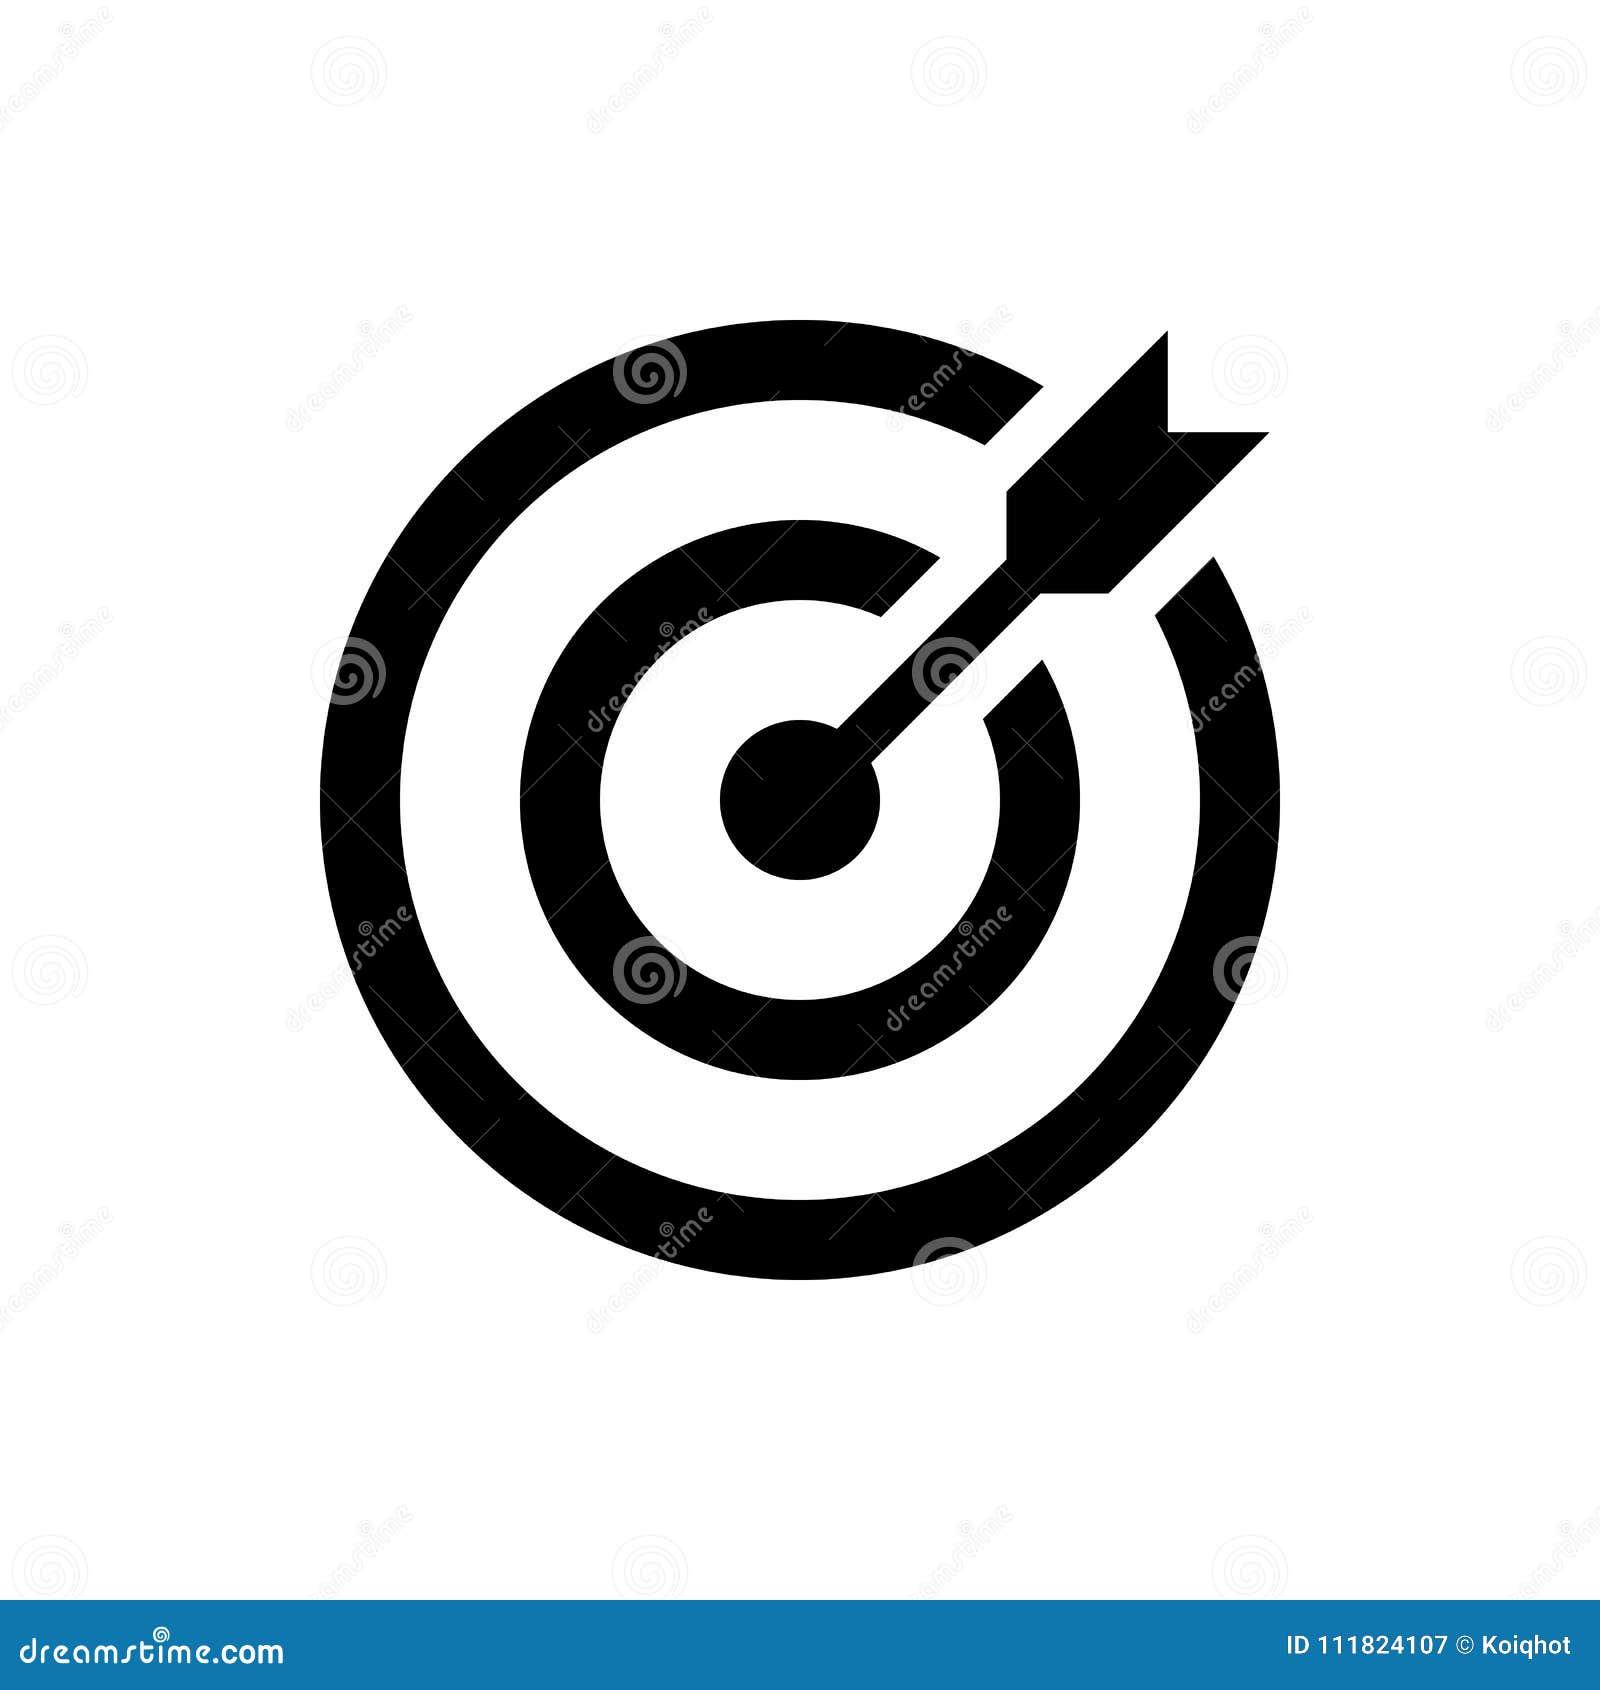 target icon, business objective 